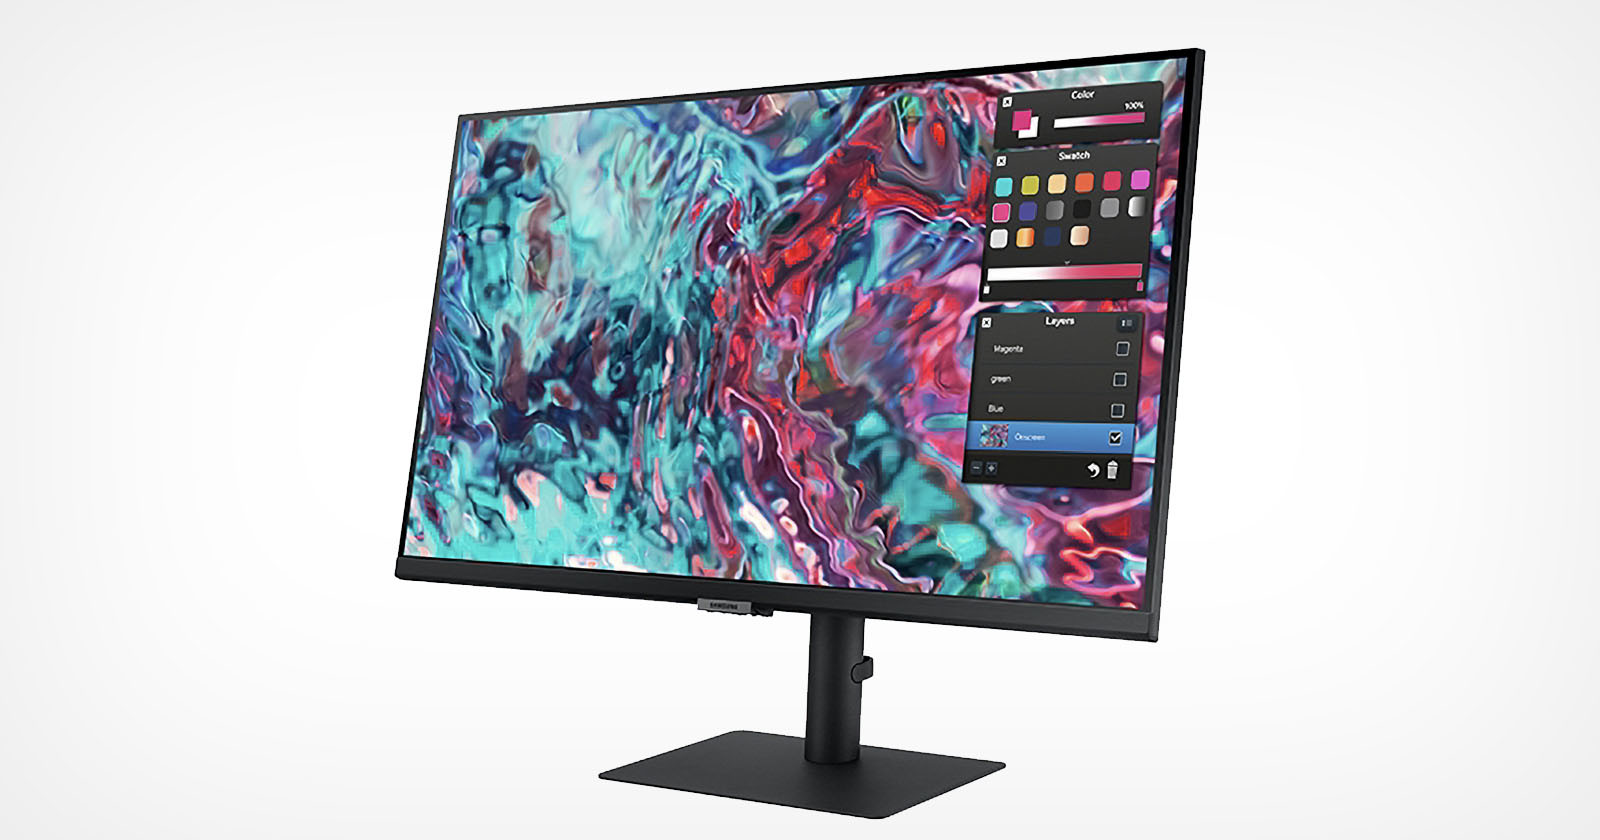  samsung s80tb monitor promises stunning accuracy 